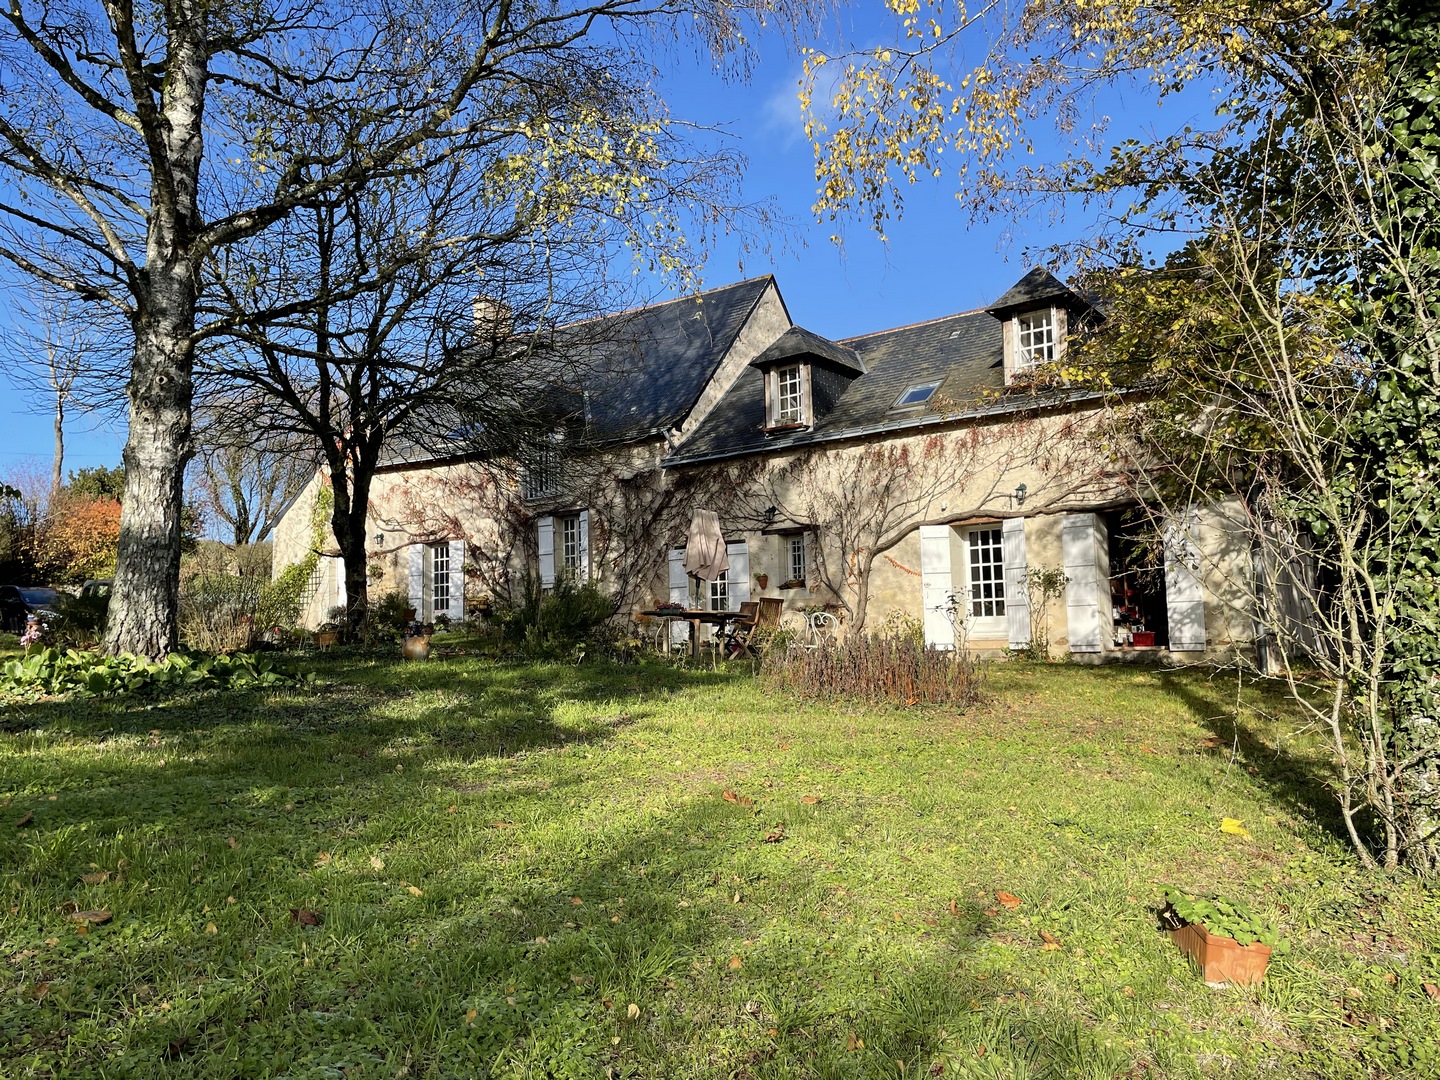 NICE FAMILY HOME IN THE COUNTRYSIDE 10 mn FROM BAUGE EN ANJOU